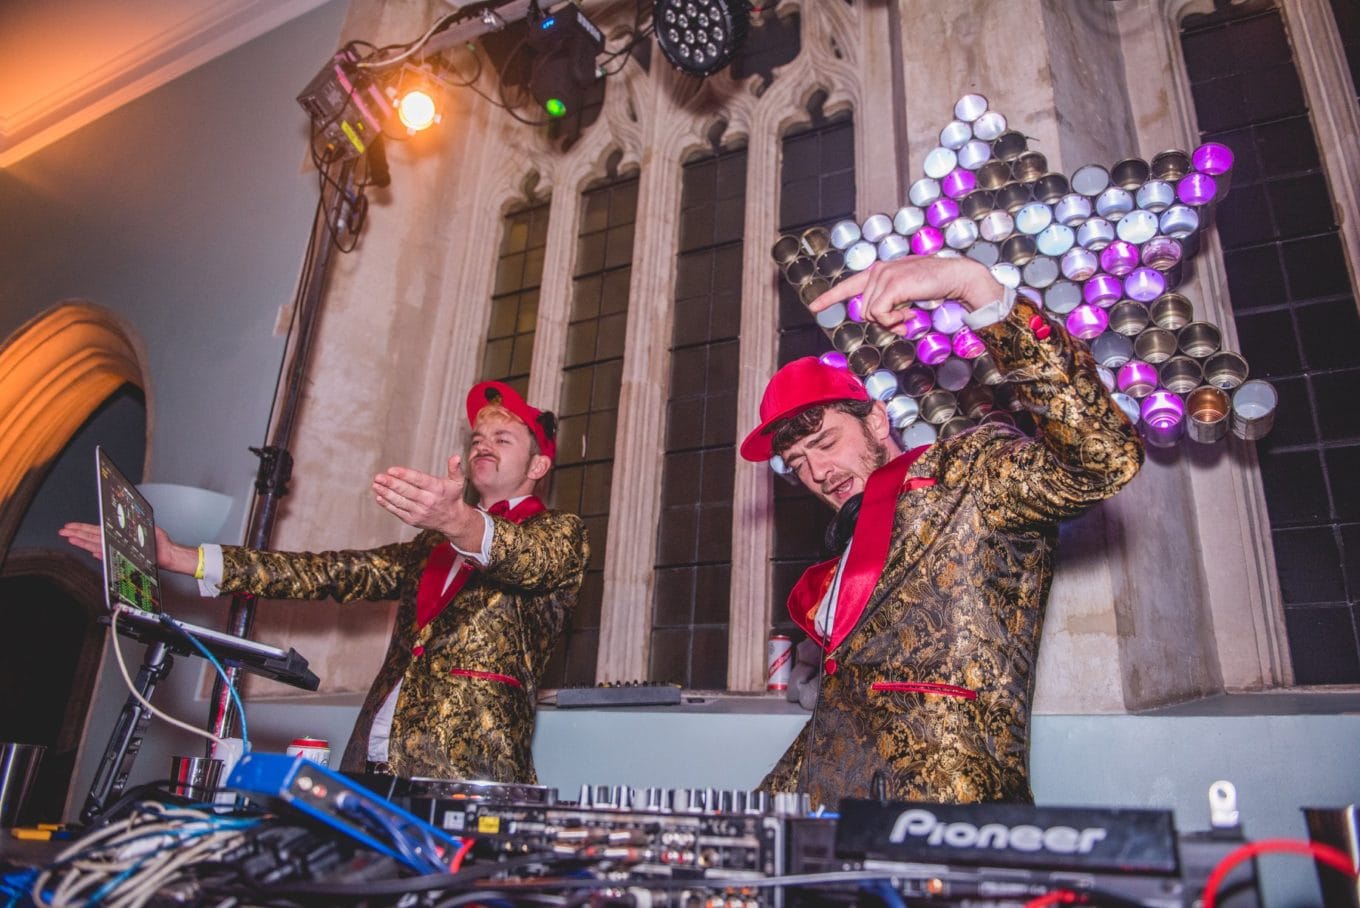 A DJ set in the Great Hall. 